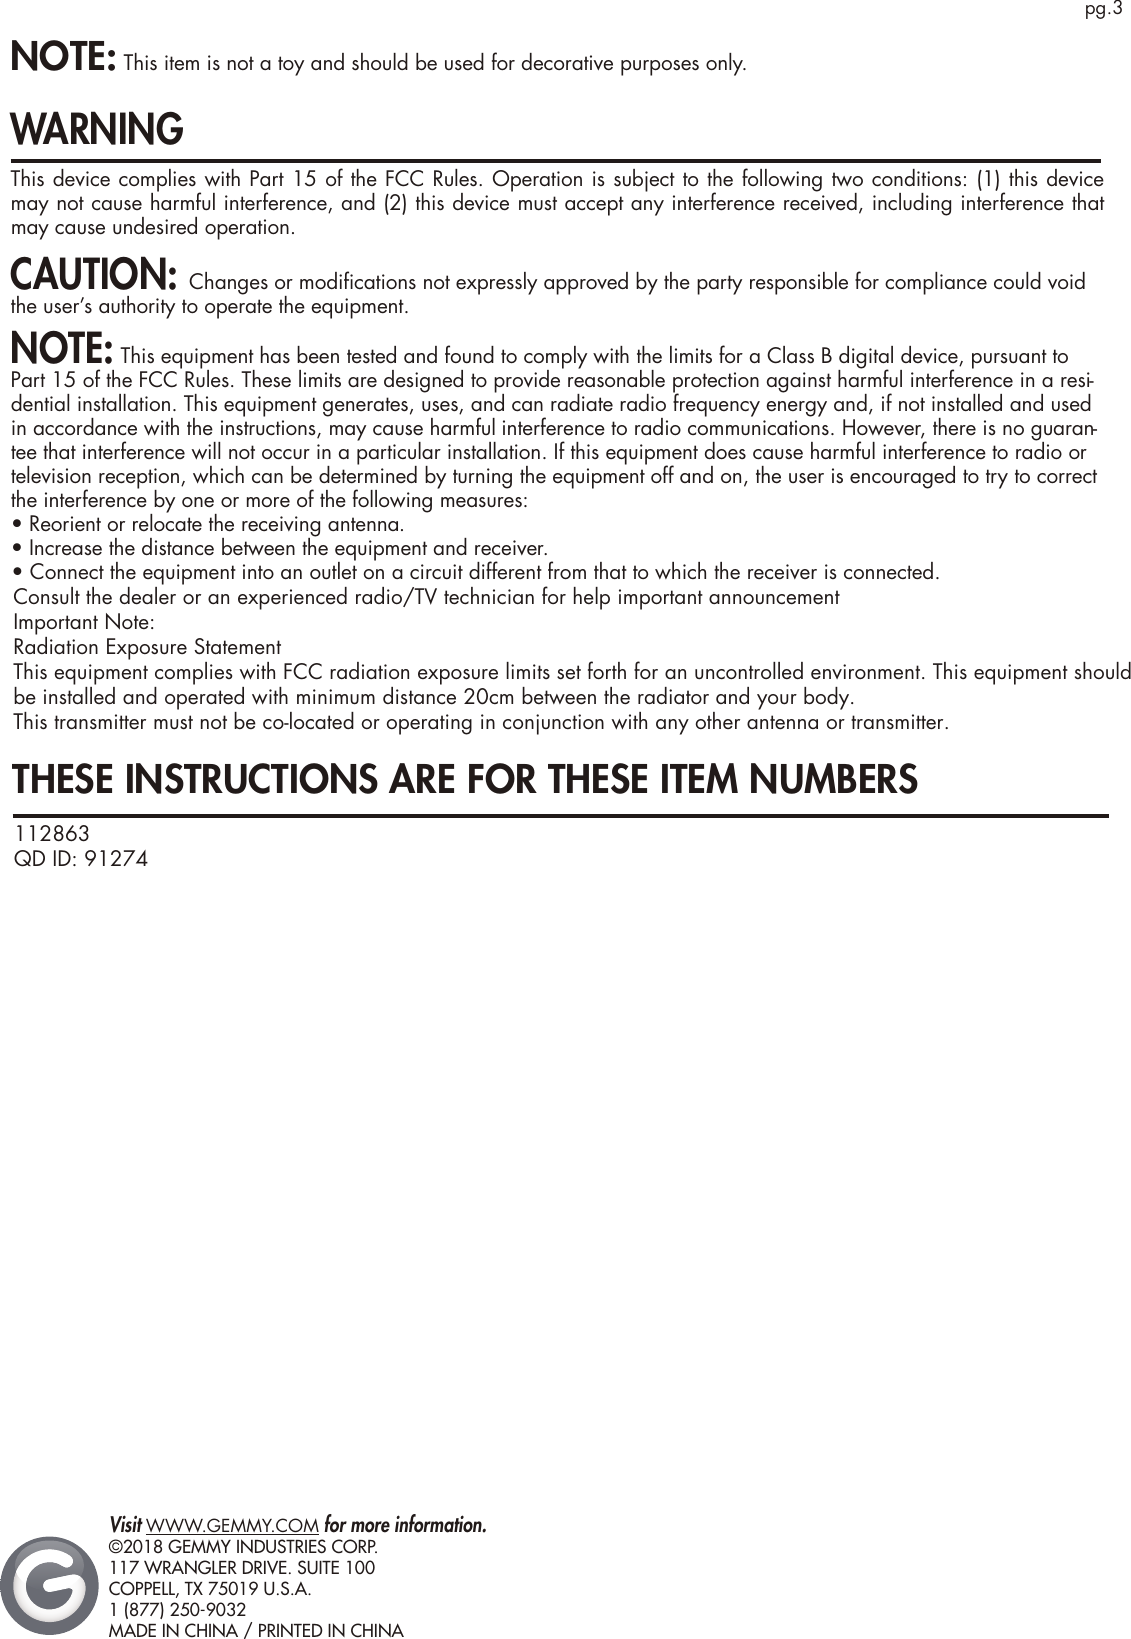 pg.3THESE INSTRUCTIONS ARE FOR THESE ITEM NUMBERS NOTE: This item is not a toy and should be used for decorative purposes only.WARNINGThis device complies with Part 15 of the FCC Rules. Operation is subject to the following two conditions: (1) this device may not cause harmful interference, and (2) this device must accept any interference received, including interference that may cause undesired operation.CAUTION: Changes or modiﬁcations not expressly approved by the party responsible for compliance could void the user’s authority to operate the equipment.NOTE: This equipment has been tested and found to comply with the limits for a Class B digital device, pursuant to Part 15 of the FCC Rules. These limits are designed to provide reasonable protection against harmful interference in a resi-dential installation. This equipment generates, uses, and can radiate radio frequency energy and, if not installed and used in accordance with the instructions, may cause harmful interference to radio communications. However, there is no guaran-tee that interference will not occur in a particular installation. If this equipment does cause harmful interference to radio or television reception, which can be determined by turning the equipment off and on, the user is encouraged to try to correct the interference by one or more of the following measures:•  Reorient or relocate the receiving antenna.• Increase the distance between the equipment and receiver. 112863QD ID: 91274  Visit WWW.GEMMY.COM for more information.©2018 GEMMY INDUSTRIES CORP.117 WRANGLER DRIVE. SUITE 100COPPELL, TX 75019 U.S.A.1 (877) 250-9032MADE IN CHINA / PRINTED IN CHINA• Connect the equipment into an outlet on a circuit different from that to which the receiver is connected.Consult the dealer or an experienced radio/TV technician for help important announcement Important Note:Radiation Exposure StatementThis equipment complies with FCC radiation exposure limits set forth for an uncontrolled environment. This equipment should be installed and operated with minimum distance 20cm between the radiator and your body. This transmitter must not be co-located or operating in conjunction with any other antenna or transmitter.